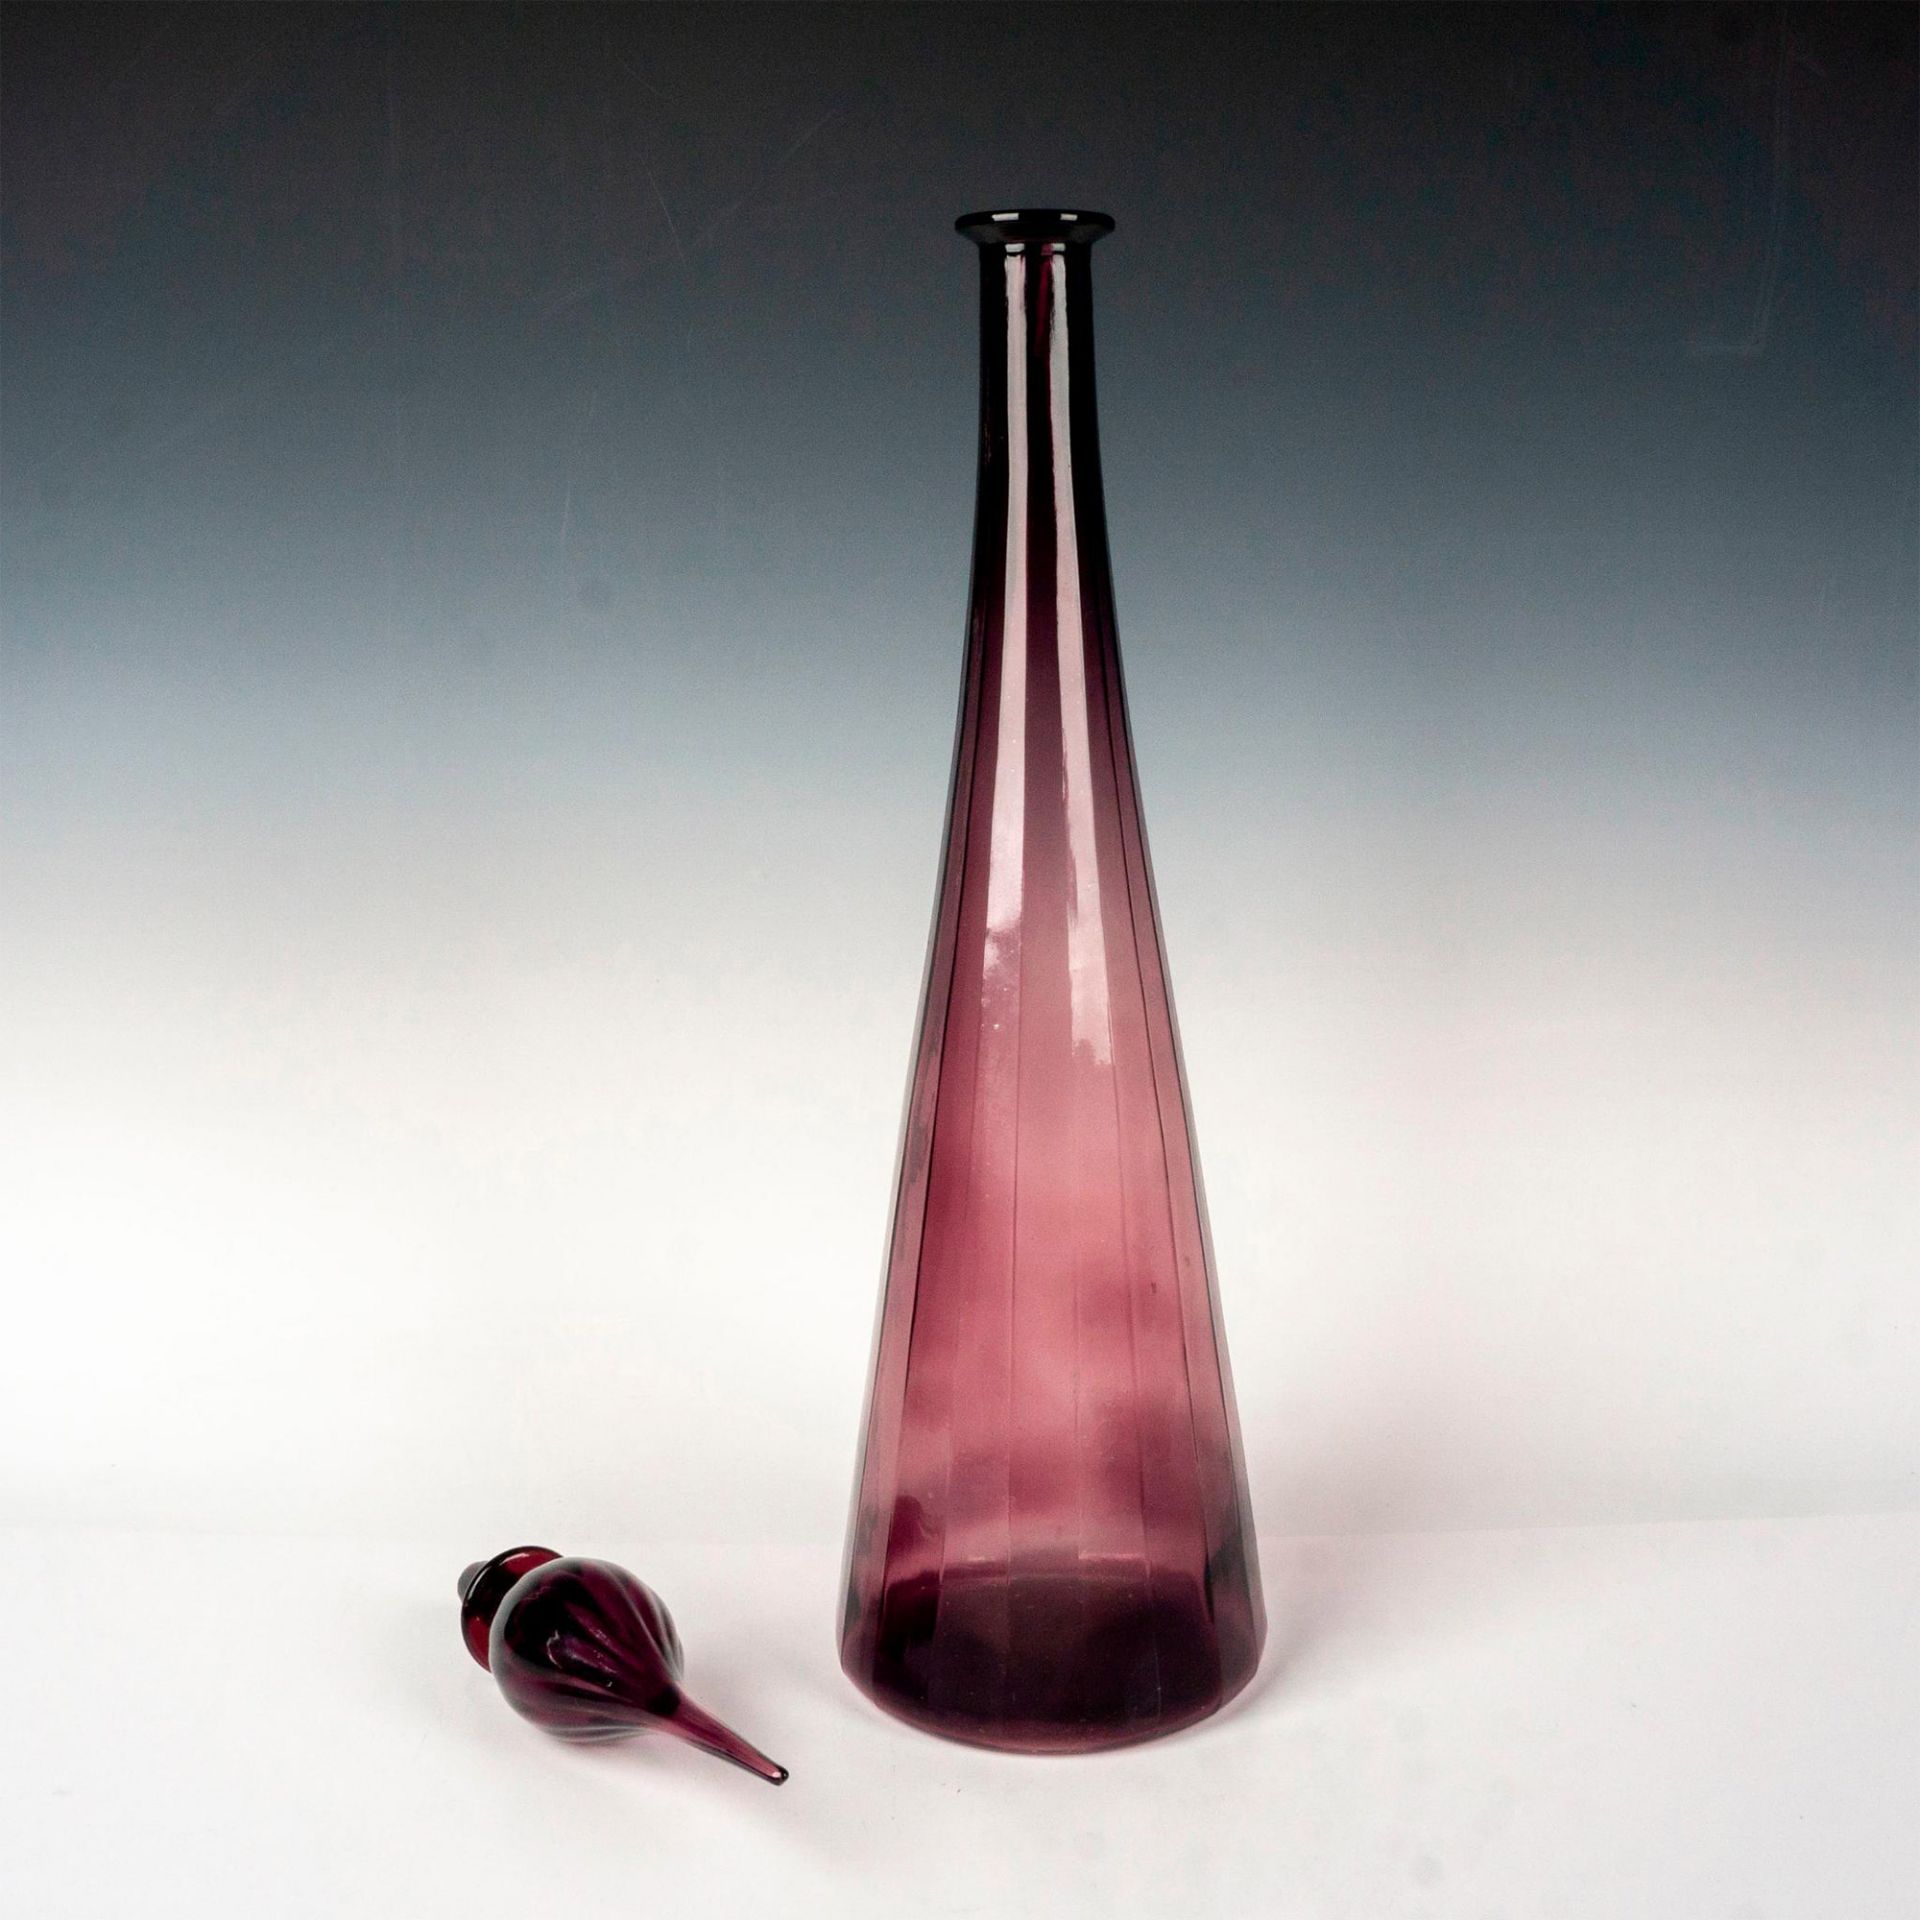 Vintage Tall Purple Art Glass Vase With Stopper - Image 2 of 4